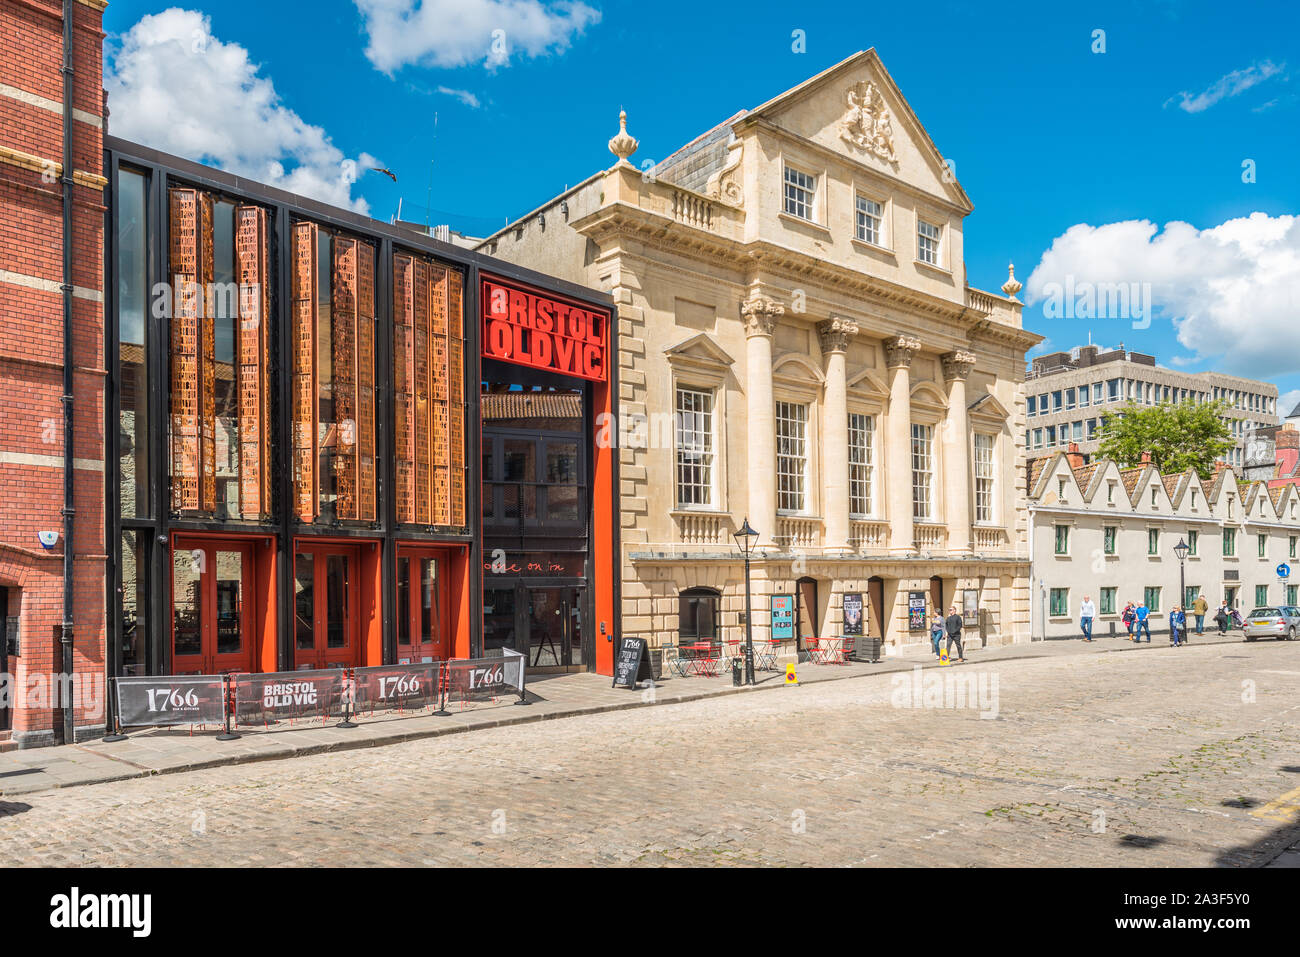 Bristol Old Vic Theatre ou théâtre royal Coopers Hall King Street Bristol Avon England UK GB EU Europe Banque D'Images